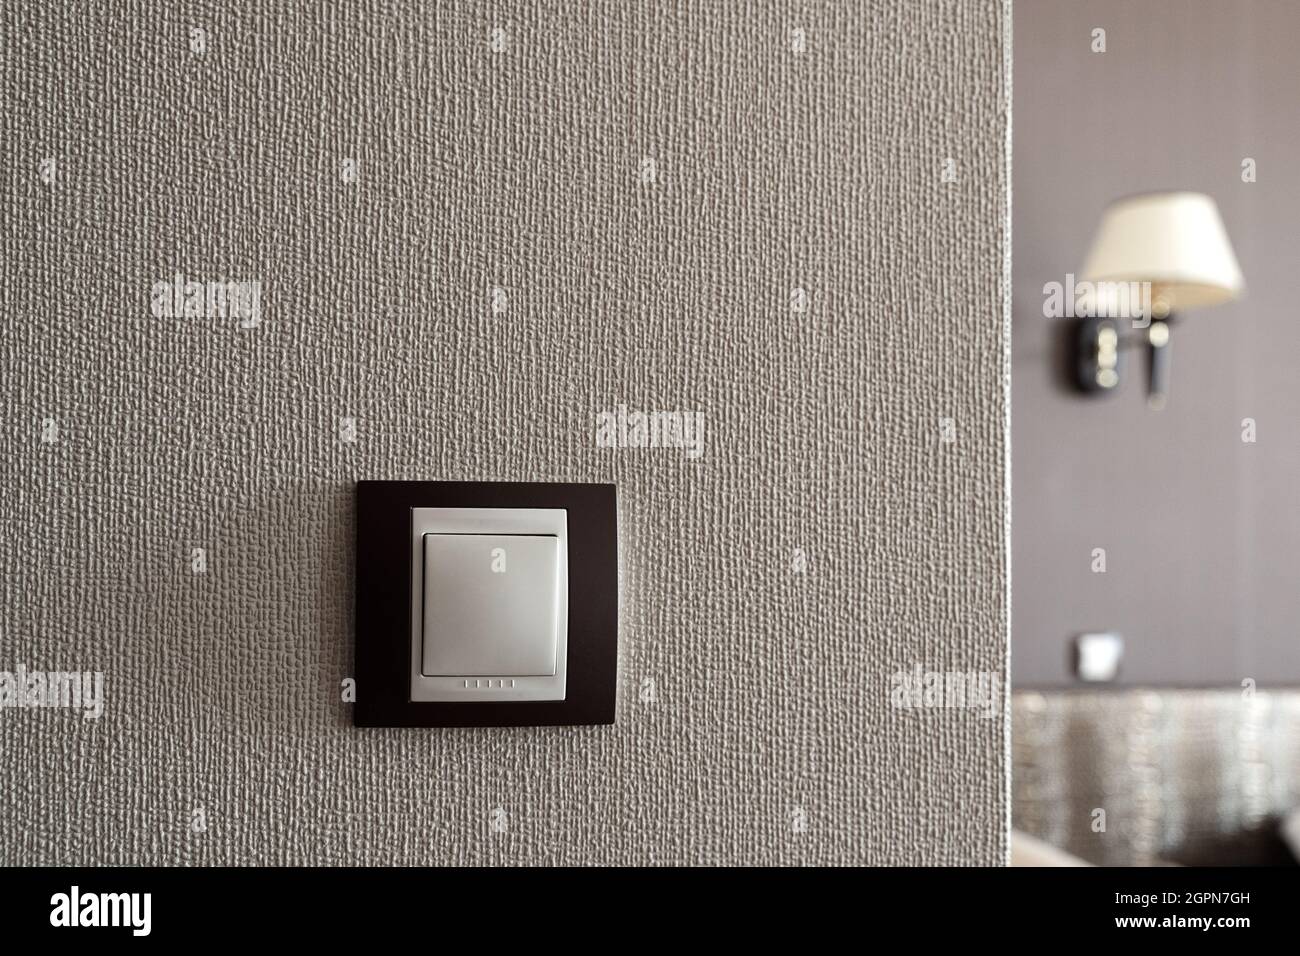 front view closeup of white light plastic switch socket on textured wall with home interior in the background Stock Photo